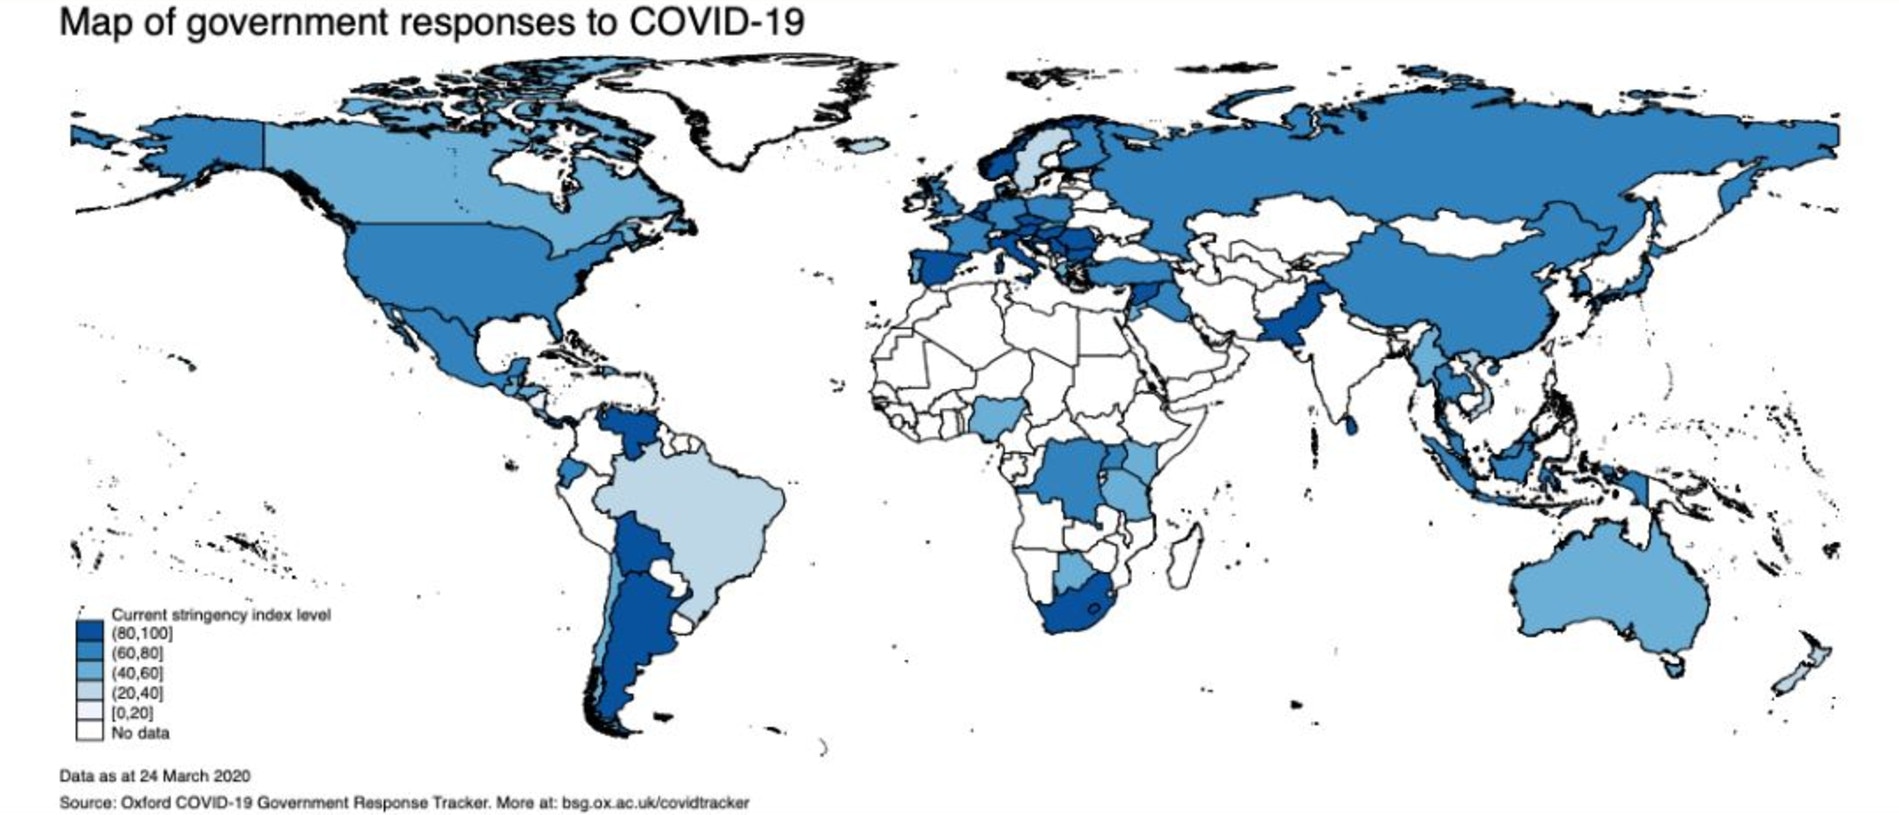 The University of Oxford's coronavirus response tracker features a Stringency Index to show the differences in measures between countries.